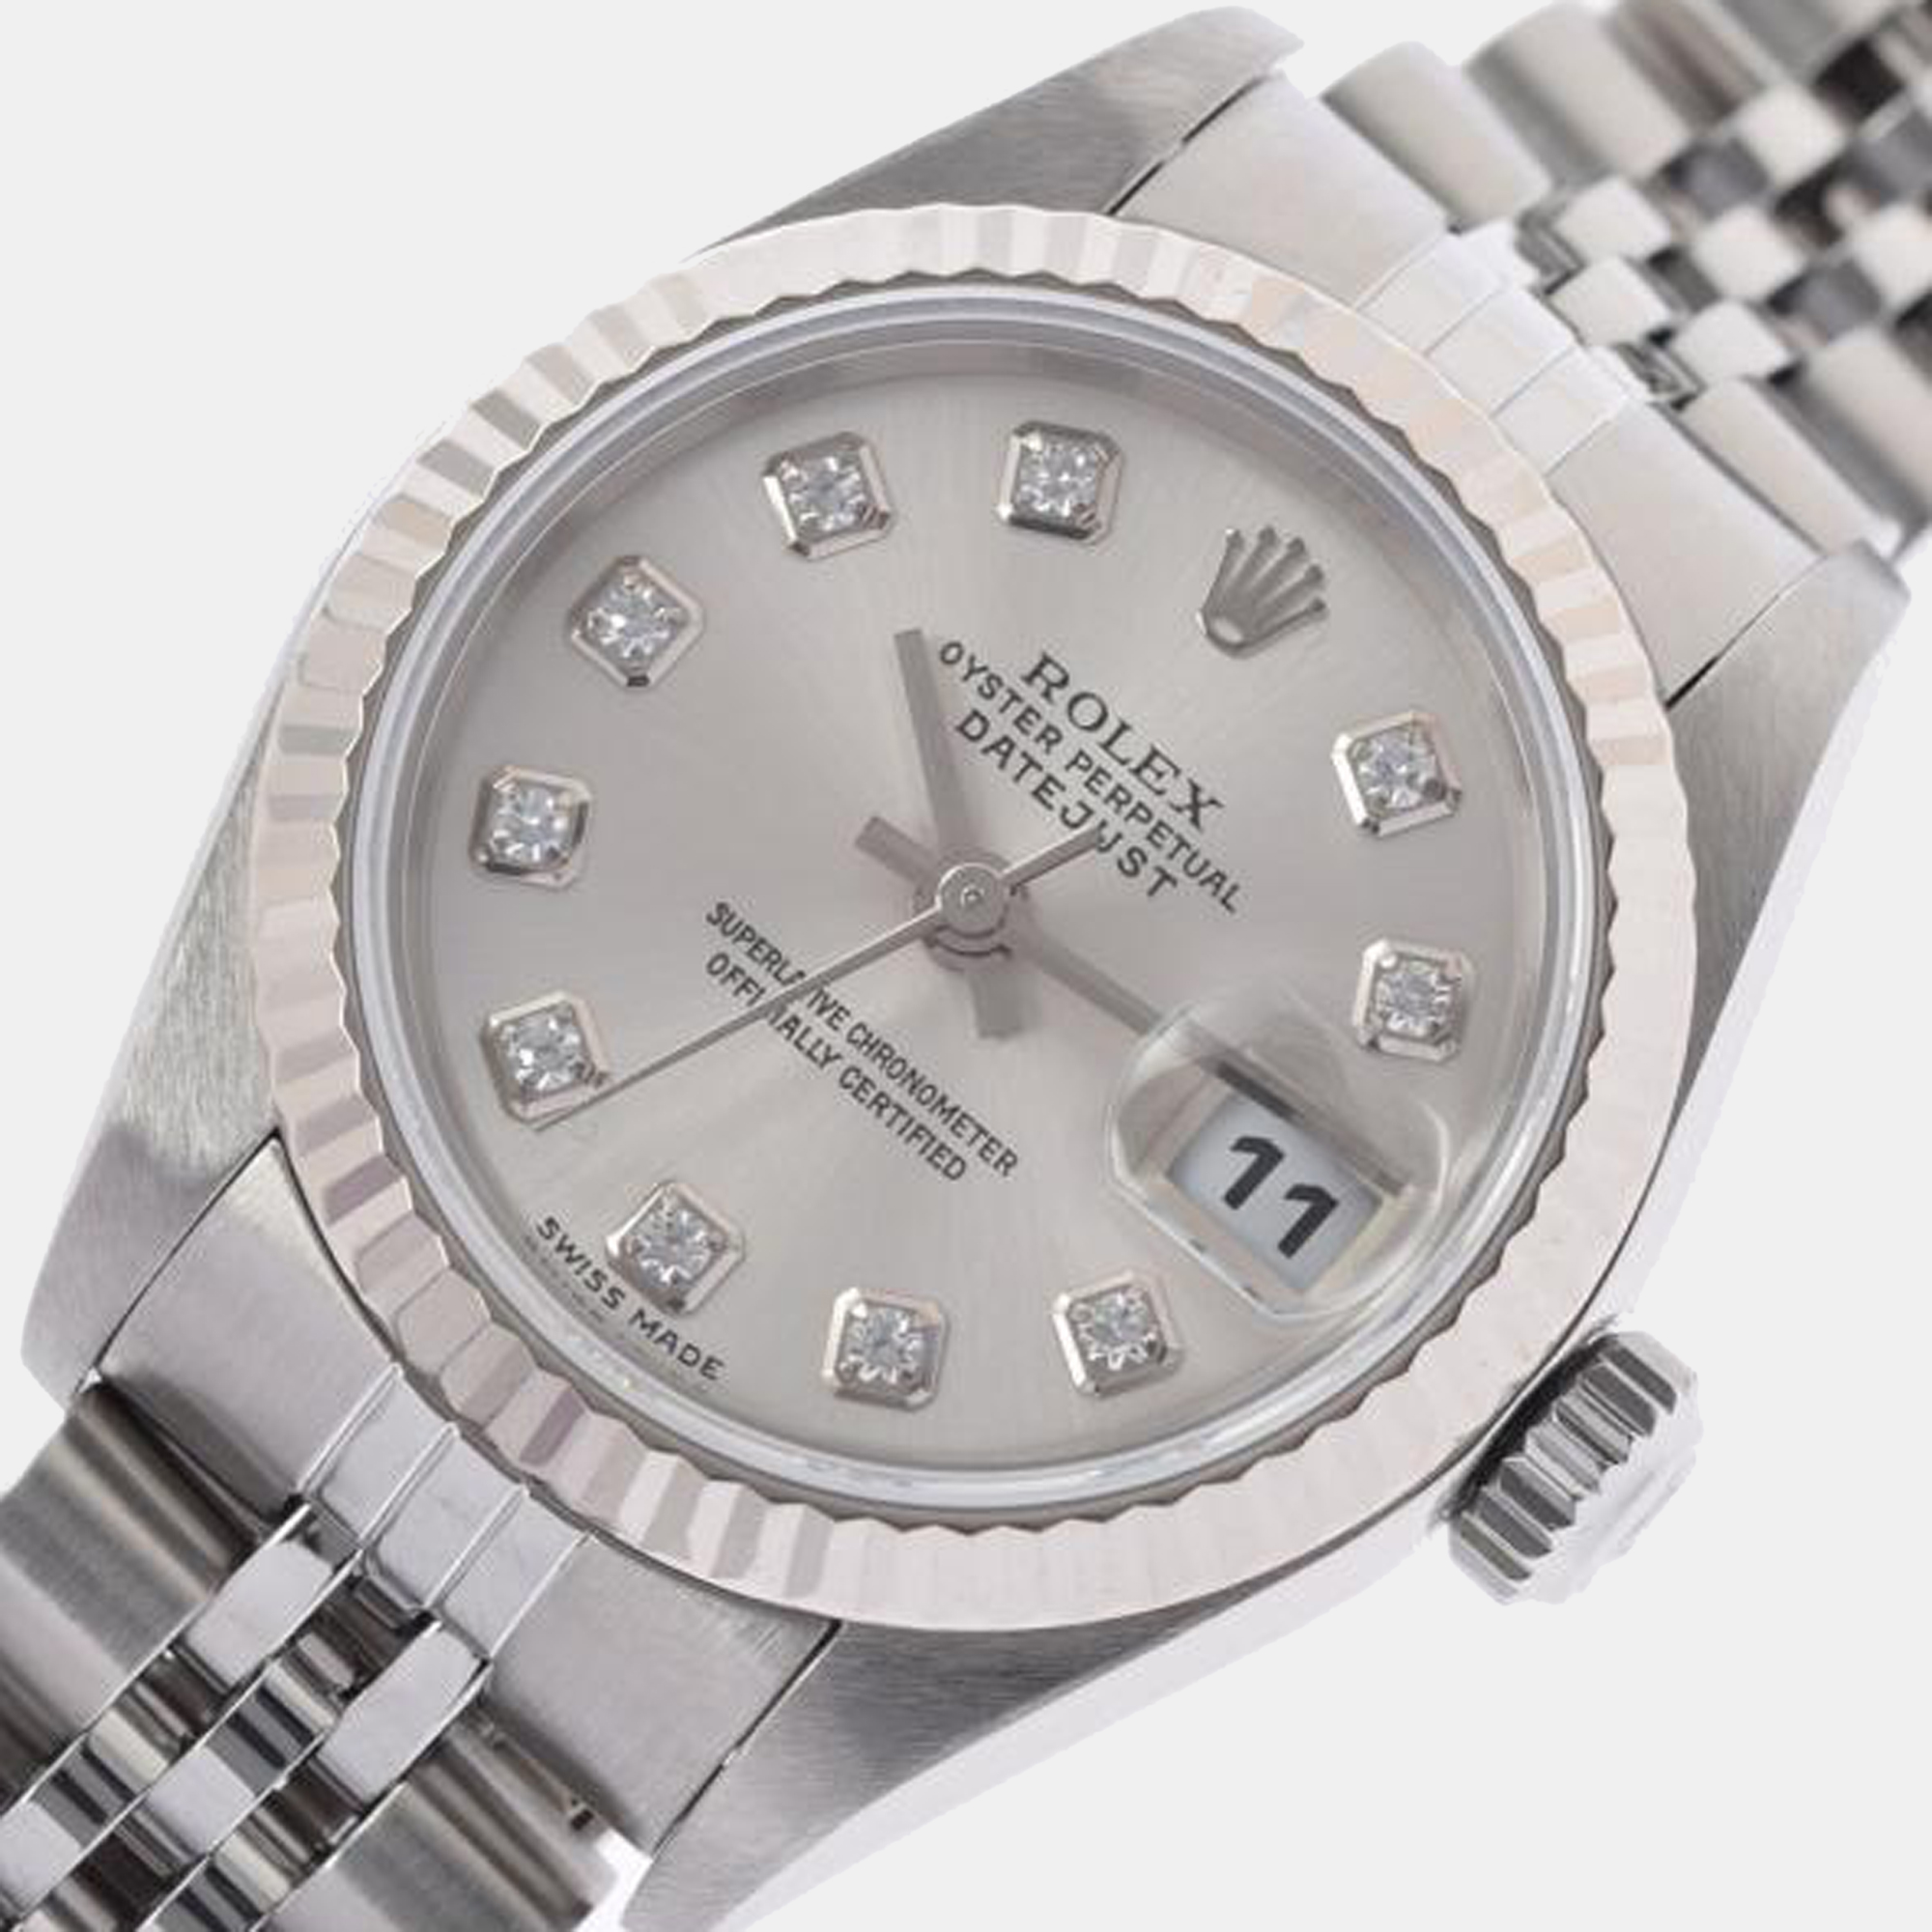 

Rolex Silver Diamond 18k White Gold And Stainless Steel Datejust 79174G Automatic Women's Wristwatch 26 mm